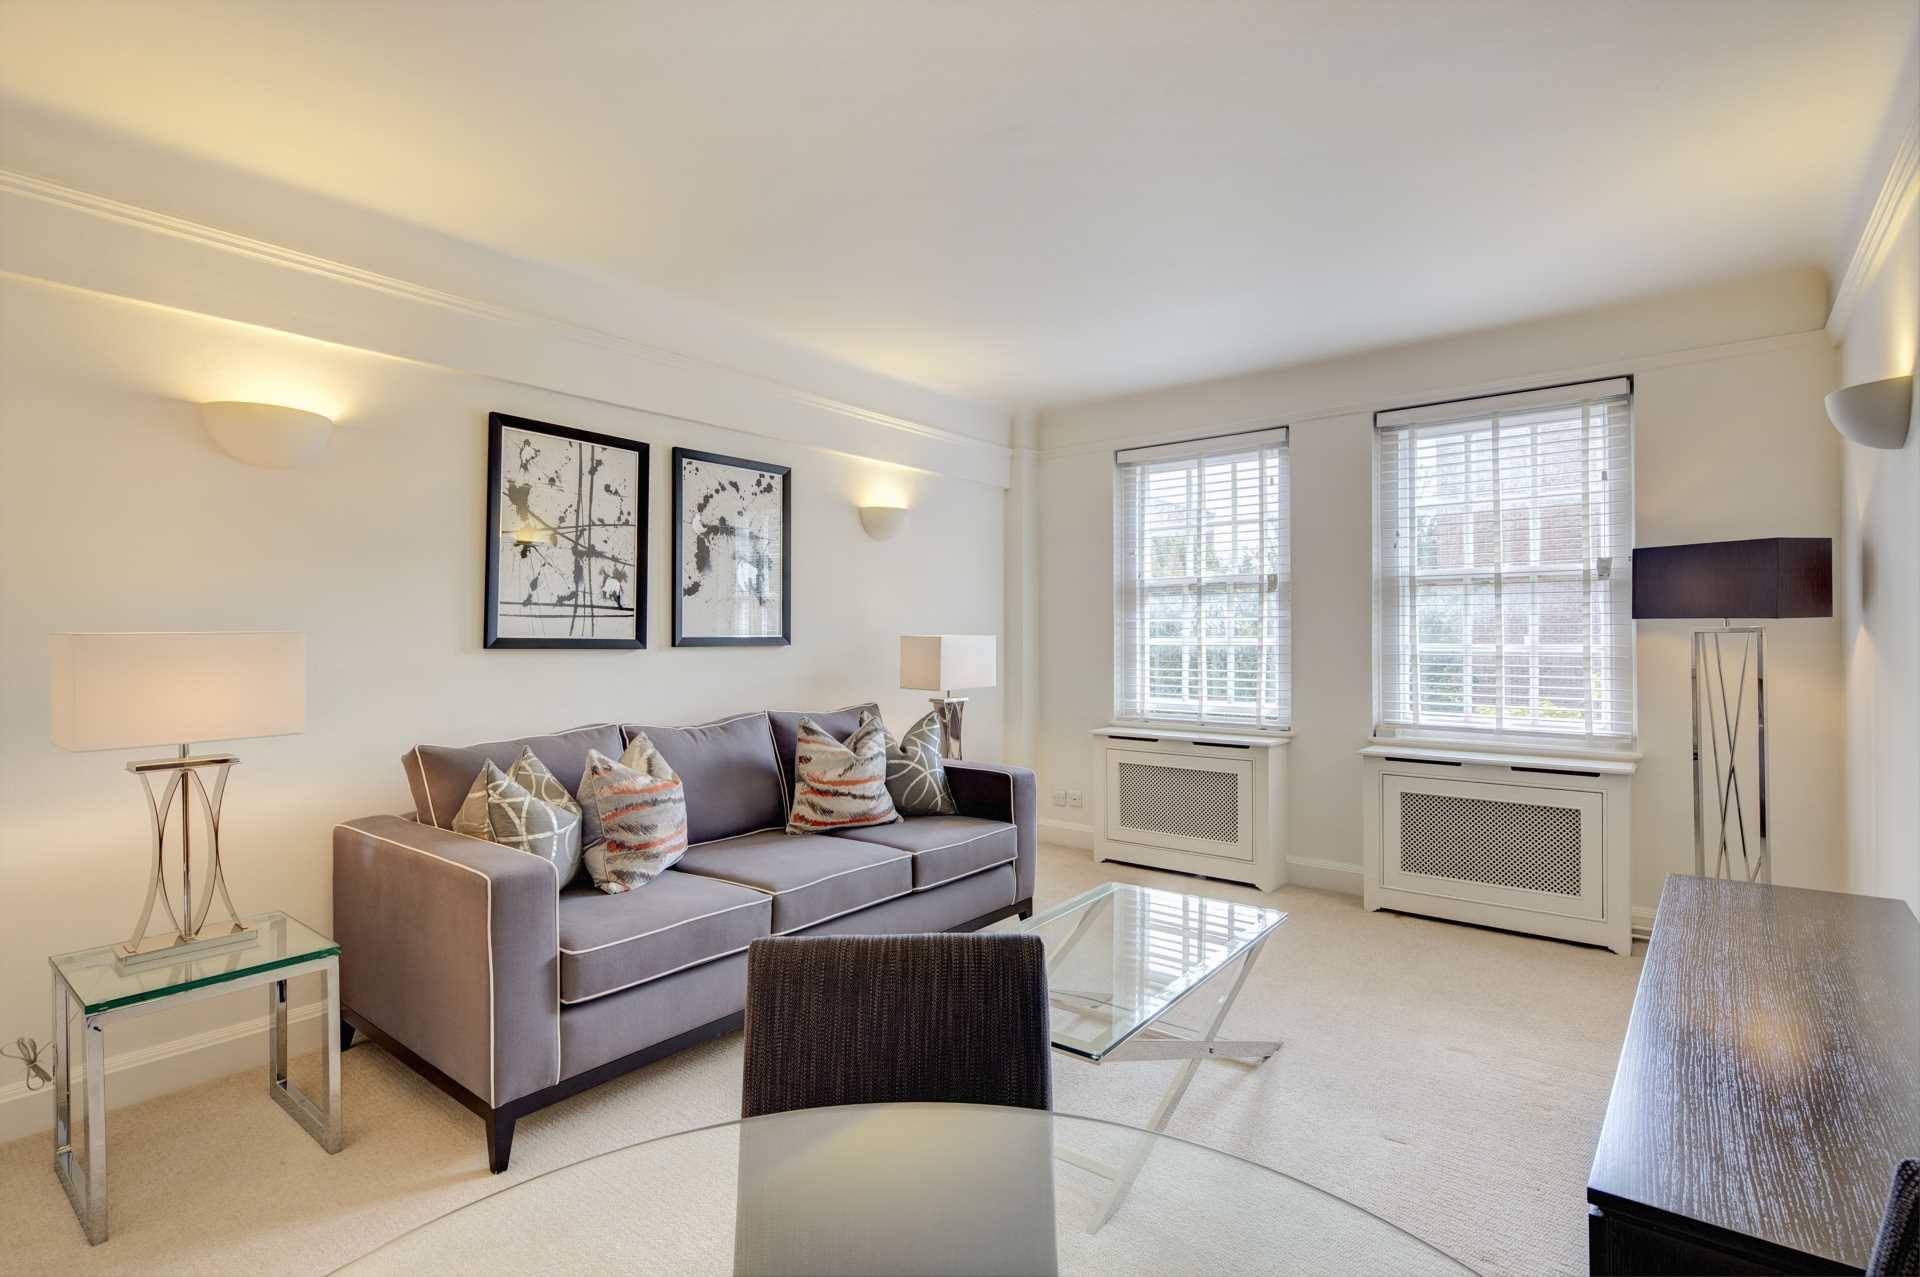 2 bedroom apartment for rent in Chelsea, London SW3